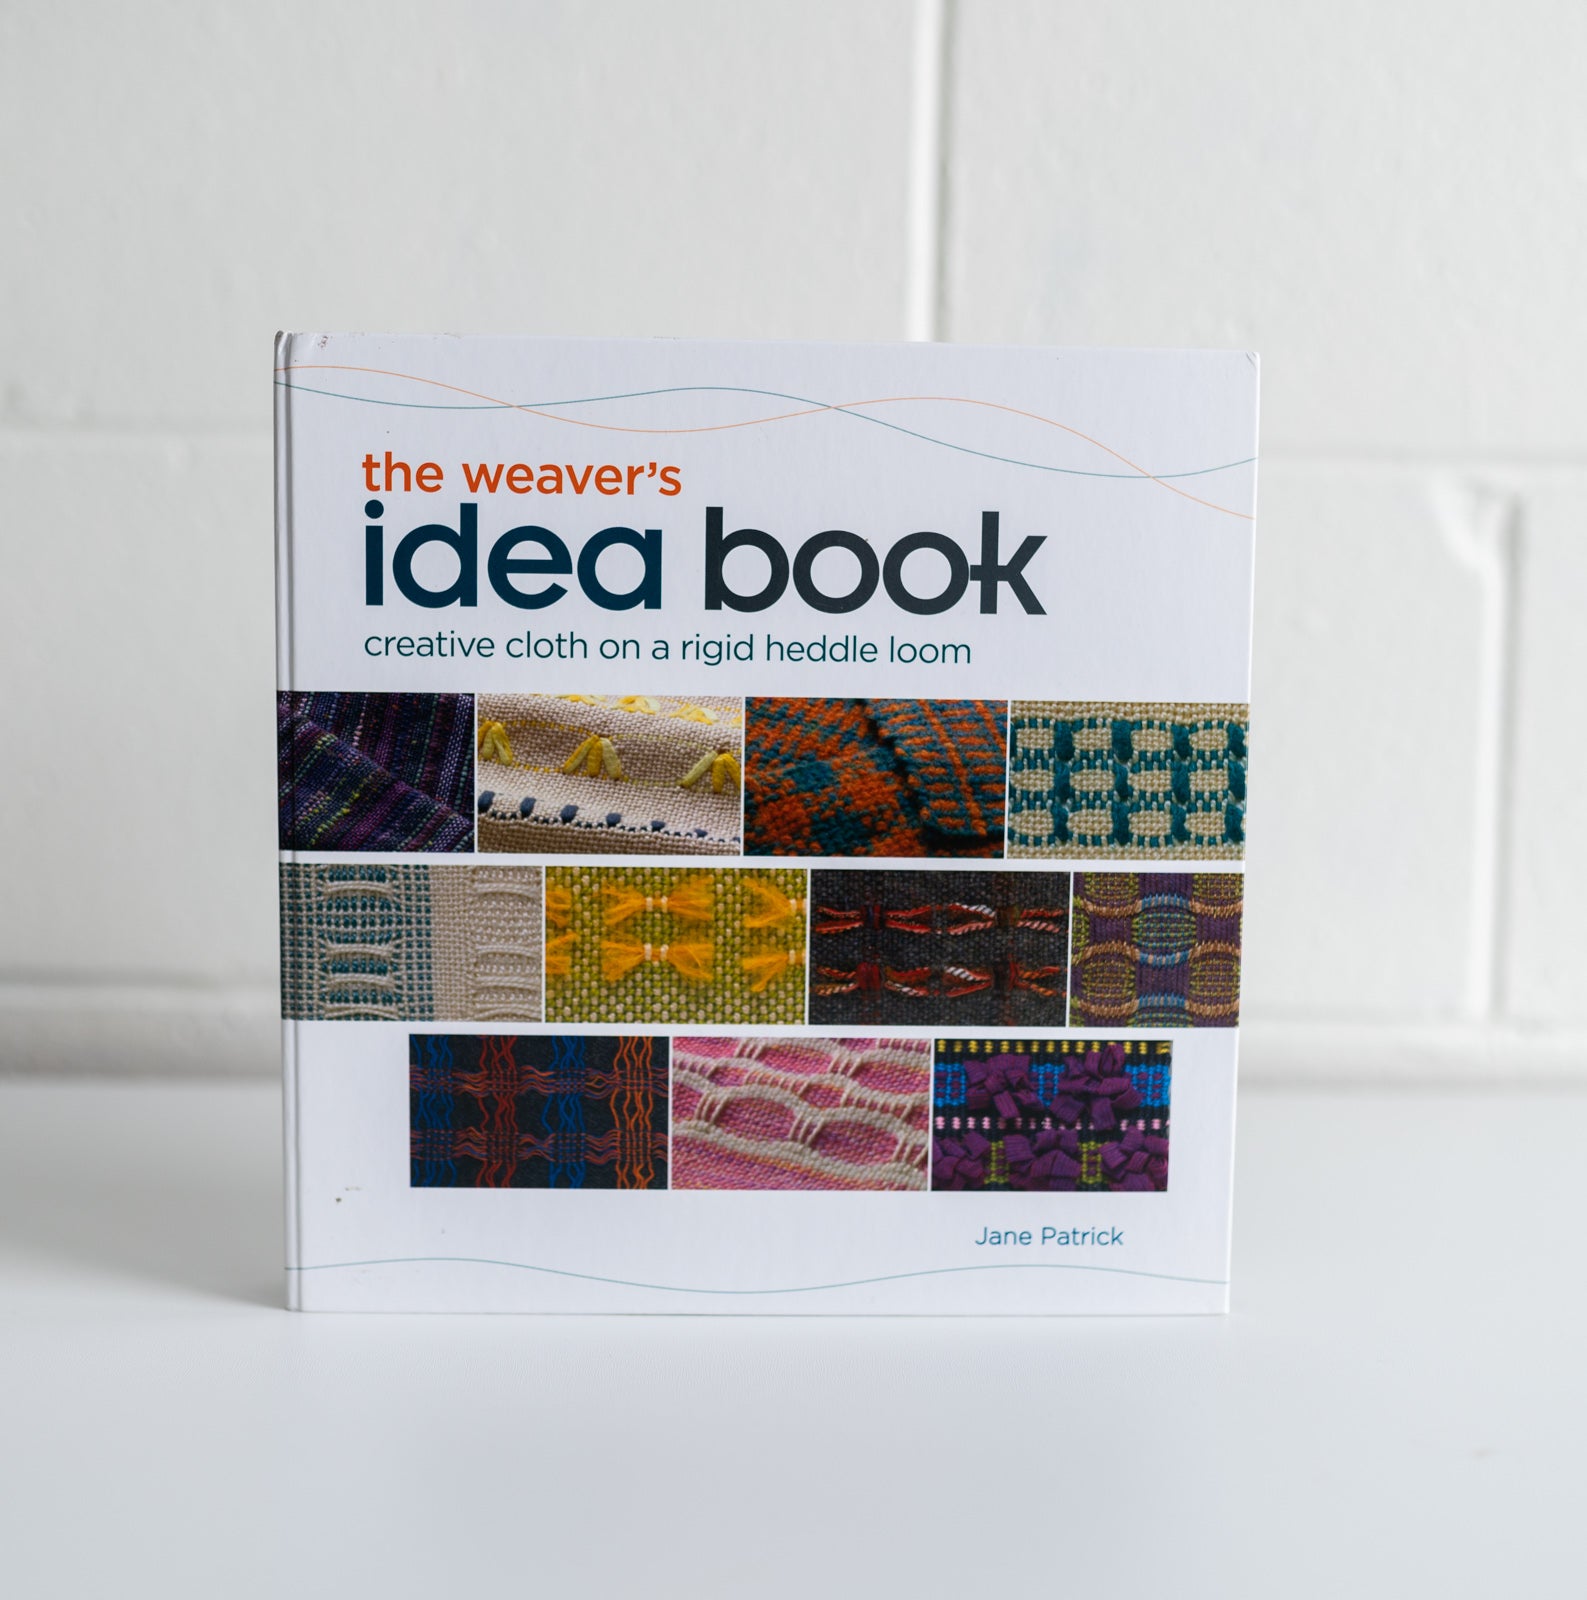 The Weaver's Idea Book: Creative Cloth on a Rigid Heddle Loom by Jane Patrick